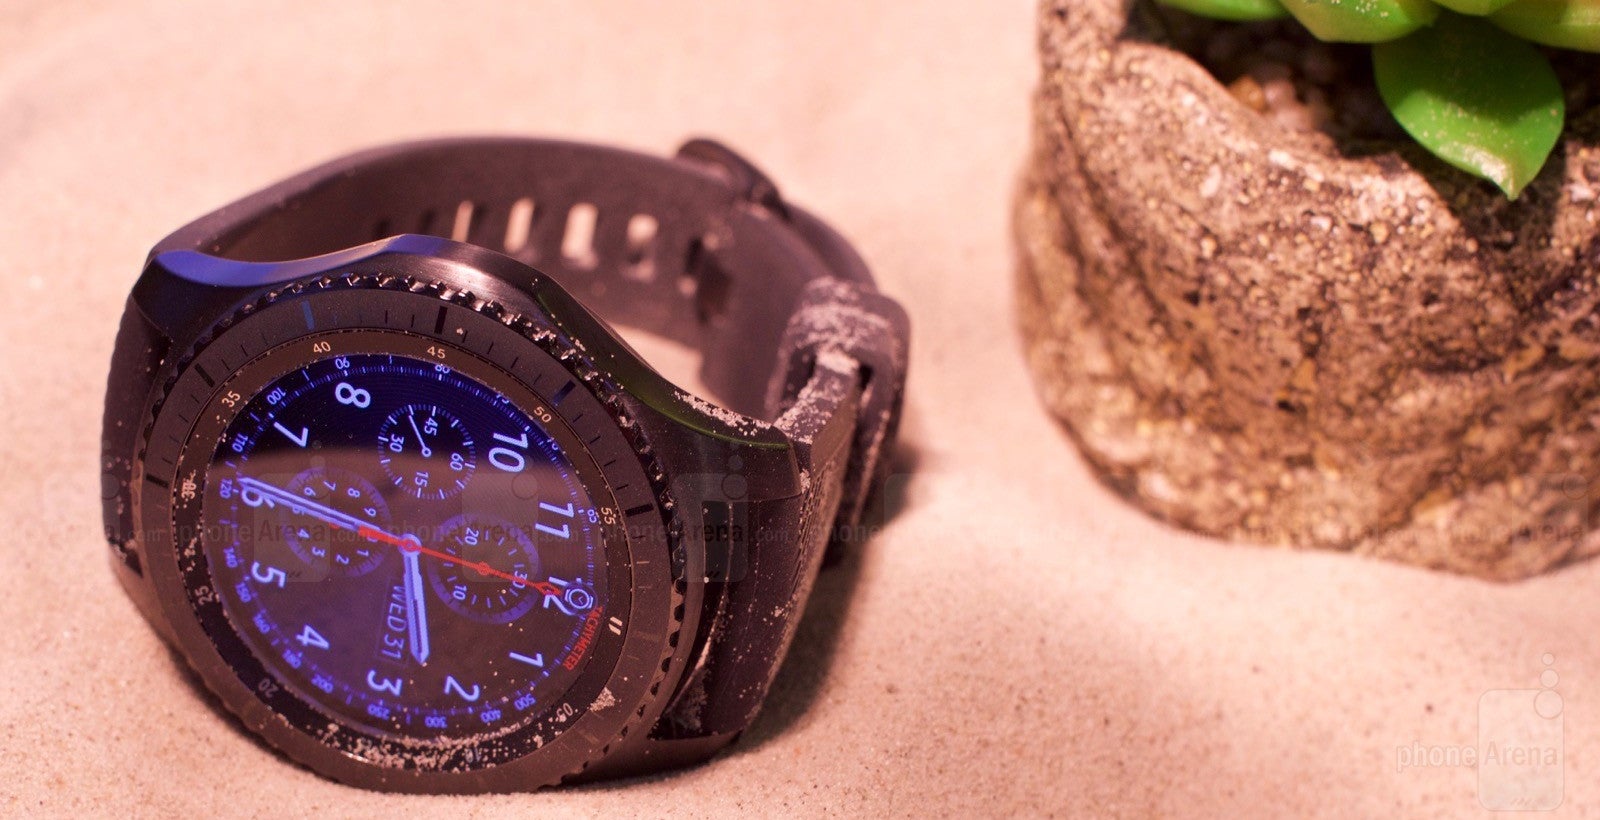 Samsung Gear S2 is here to stay; update with Gear S3 software features incoming